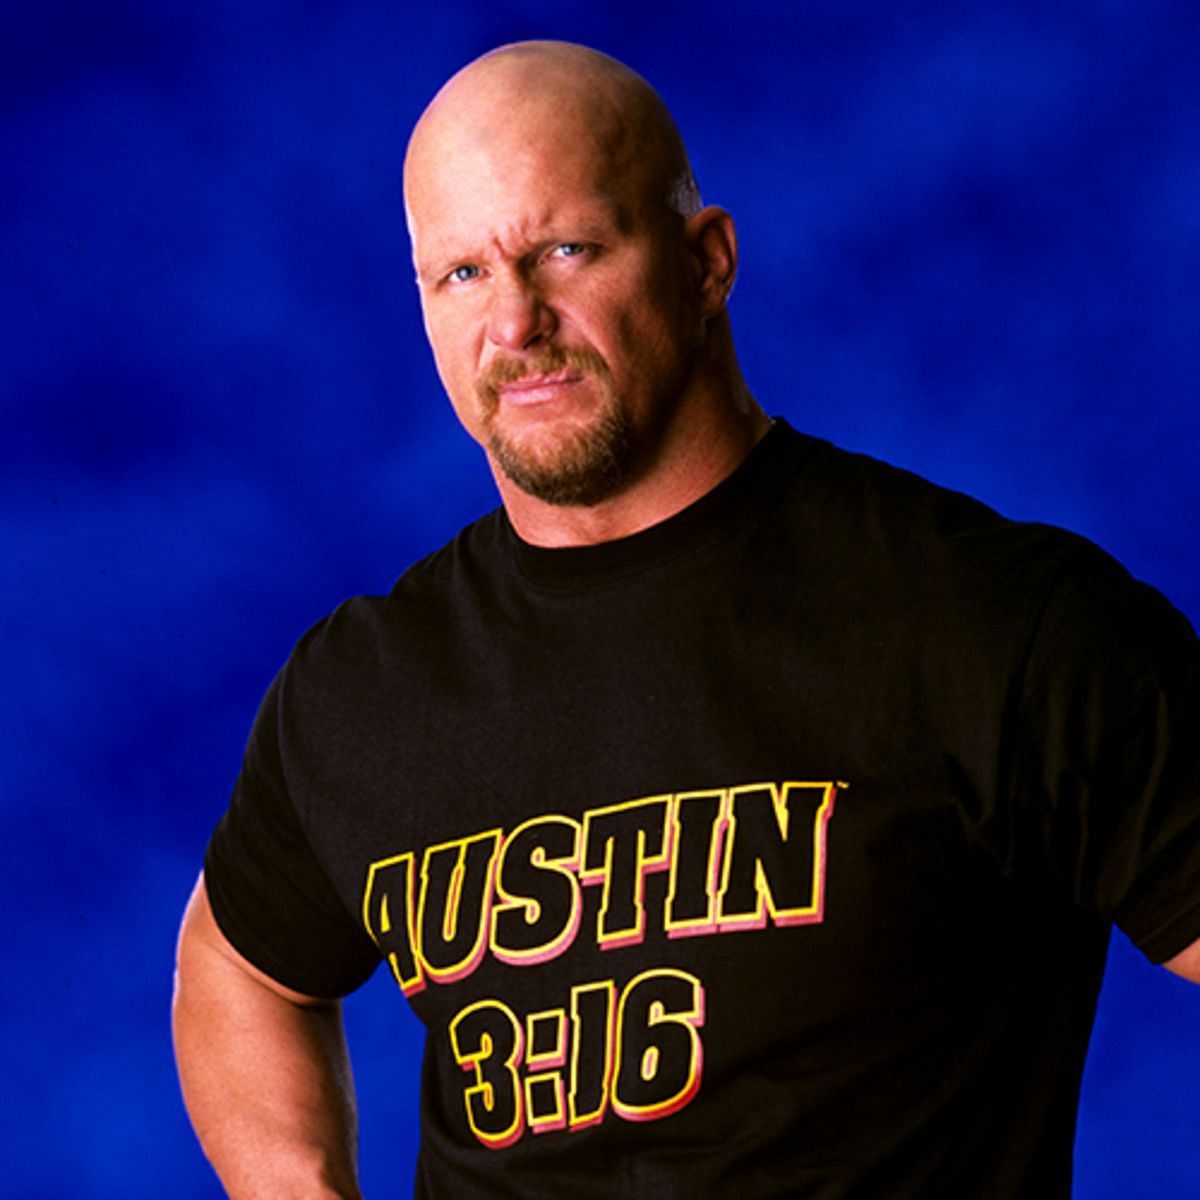 Following the defeat of The Alliance, of which he was a member, Steve Austin would revert to his most iconic WWE theme